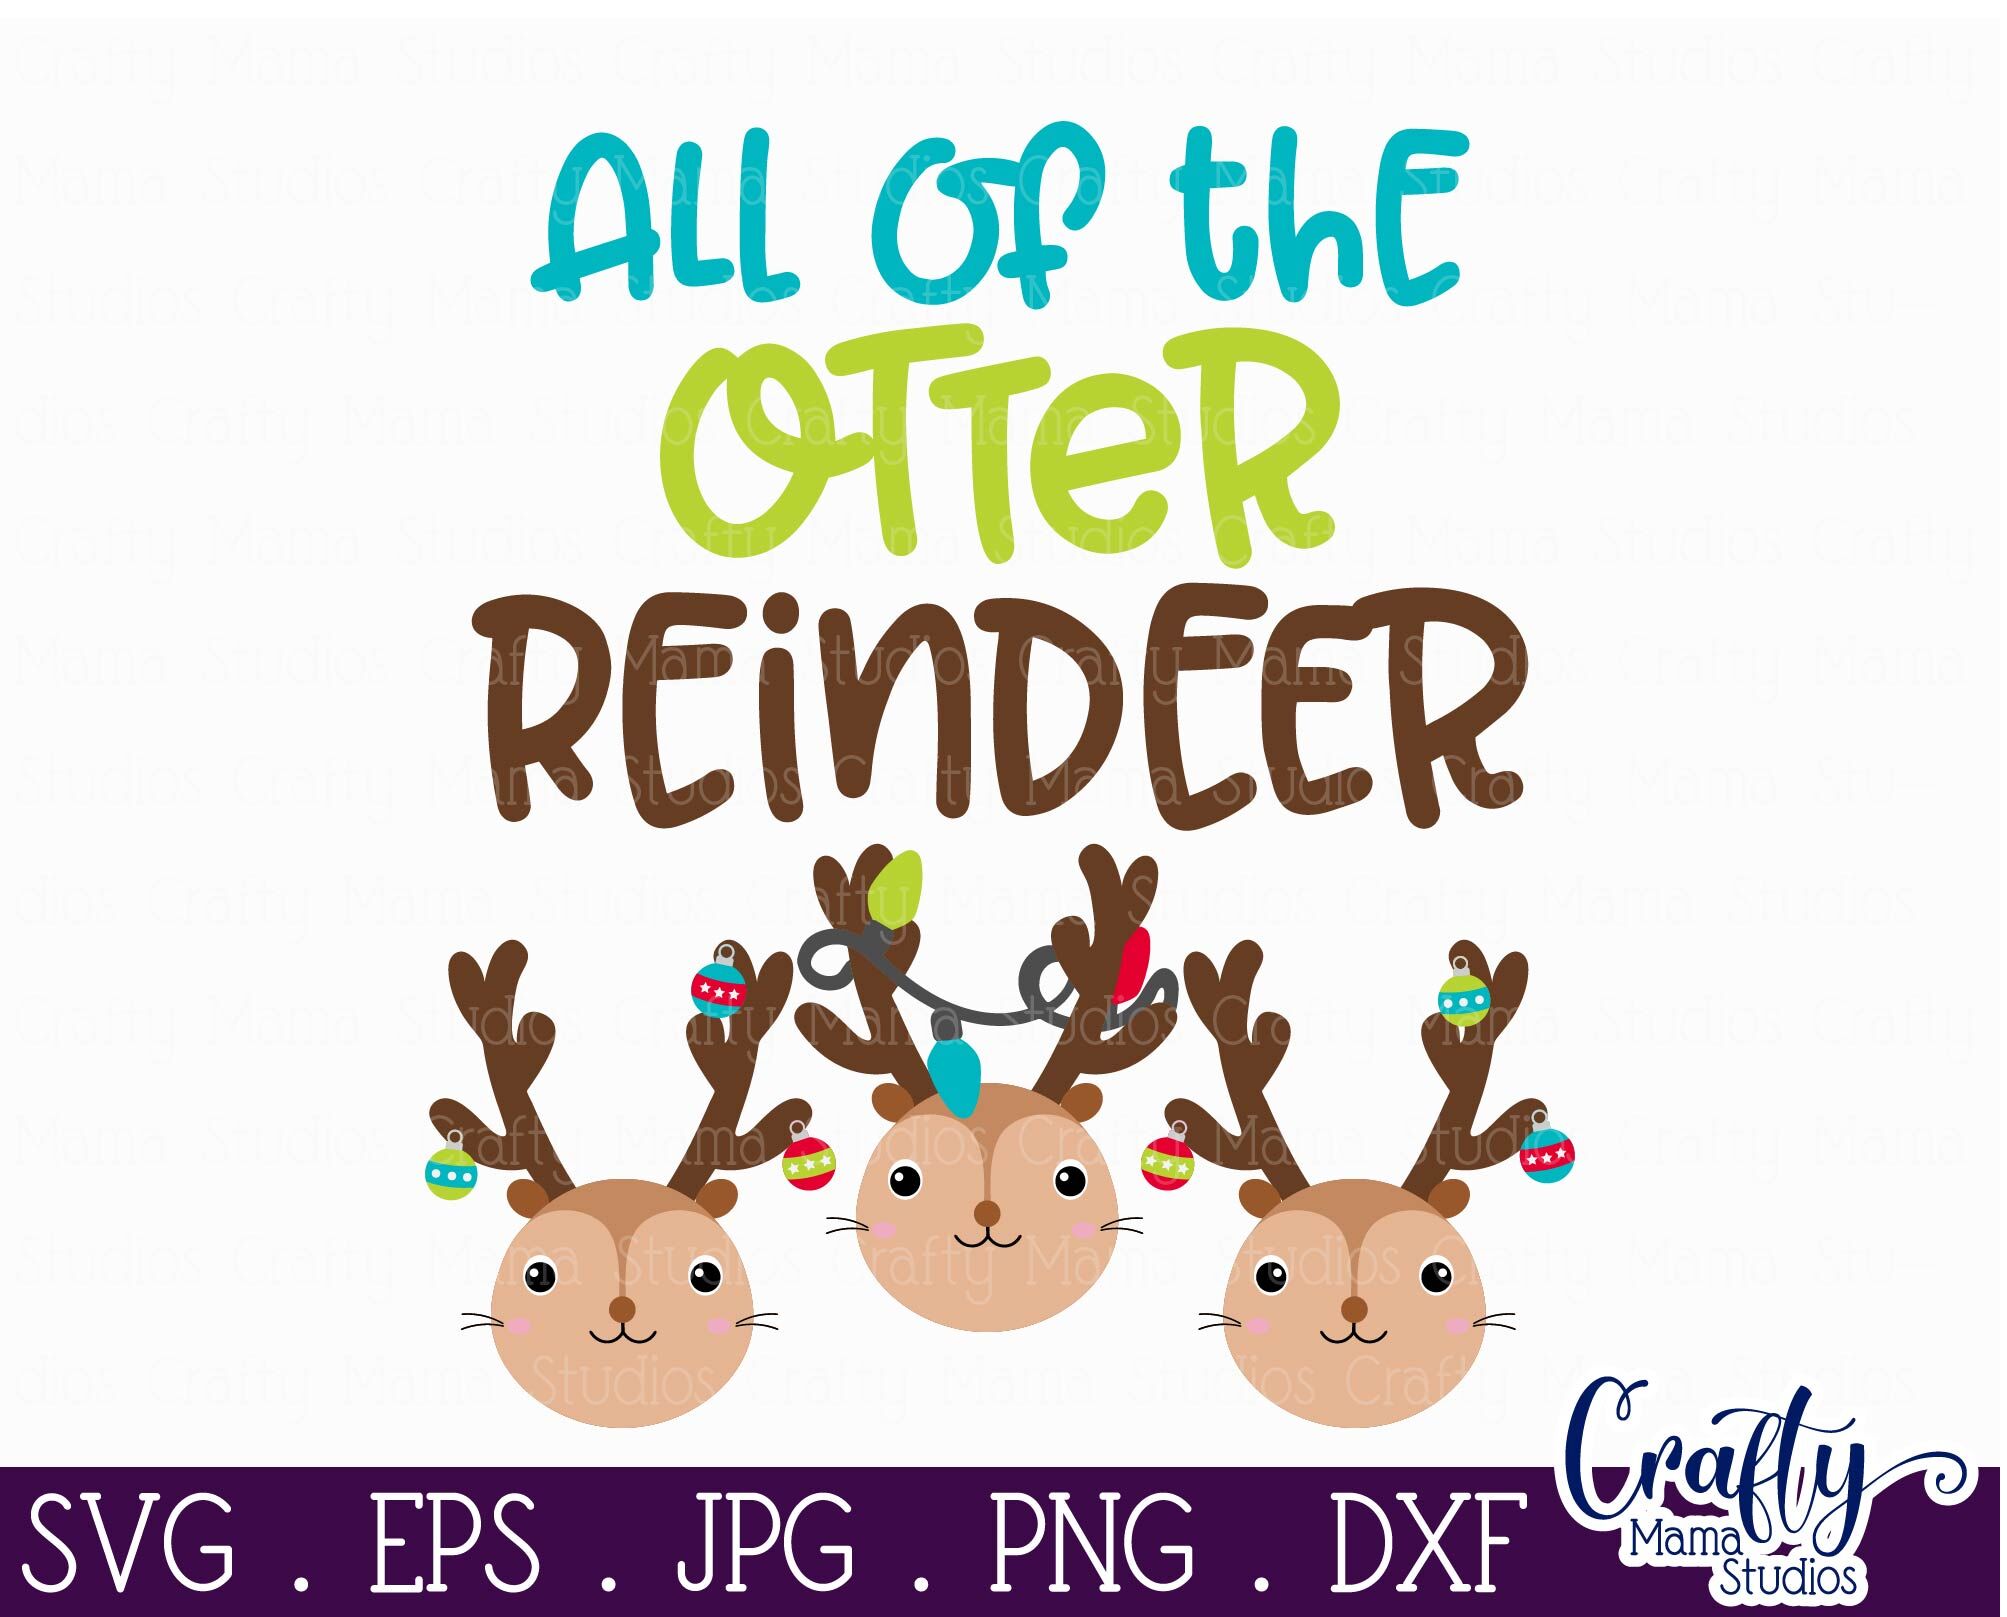 All Of Otter Reindeer Svg, Funny Christmas Song Svg By Crafty Mama Studios  | TheHungryJPEG